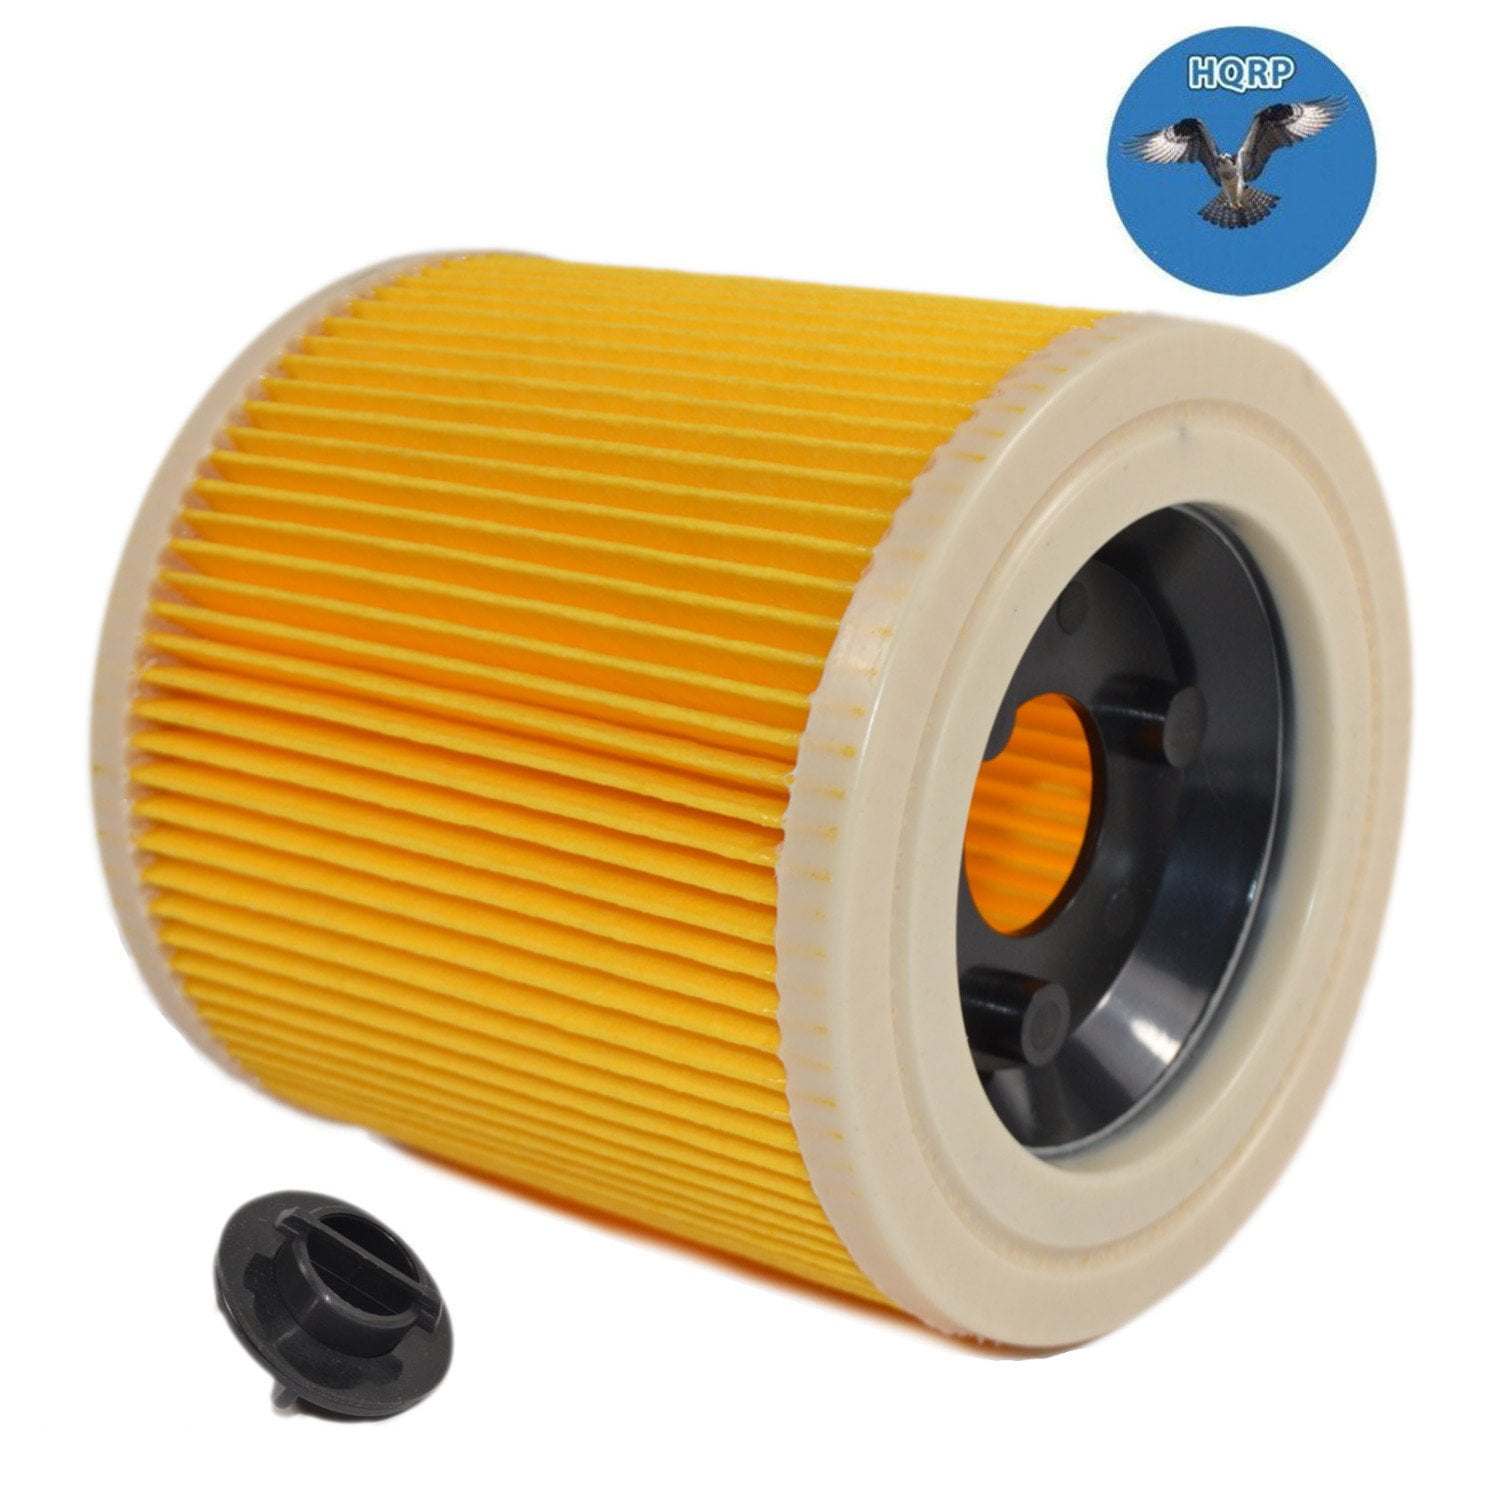 A1001 21 A1000 Cartridge / Vacuum Cleaner Filter compatible with KARCHER 1000 